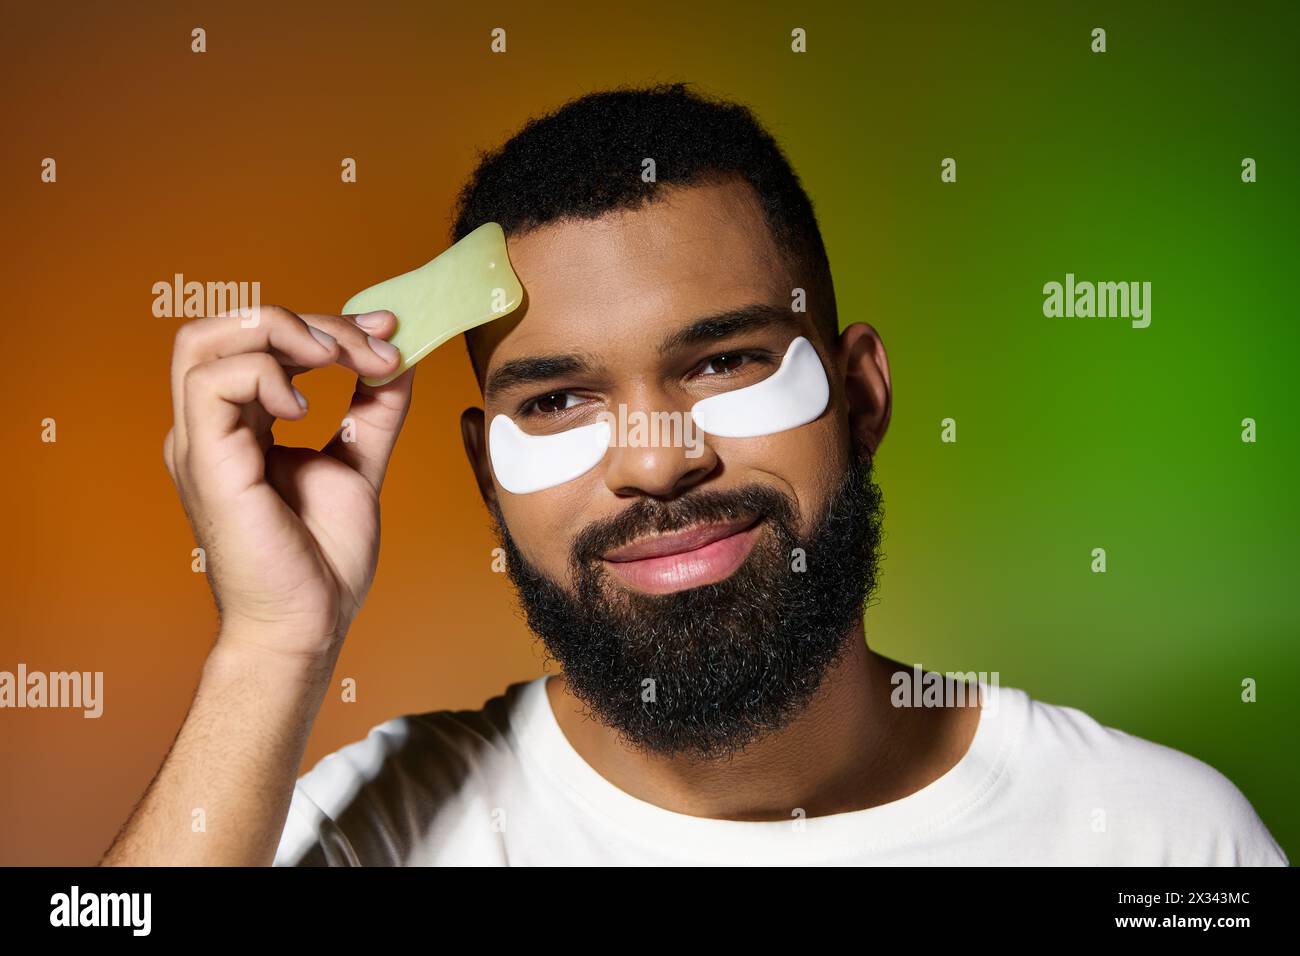 A man with a beard and eye patches on his face, engaging in skin care routine. Stock Photo